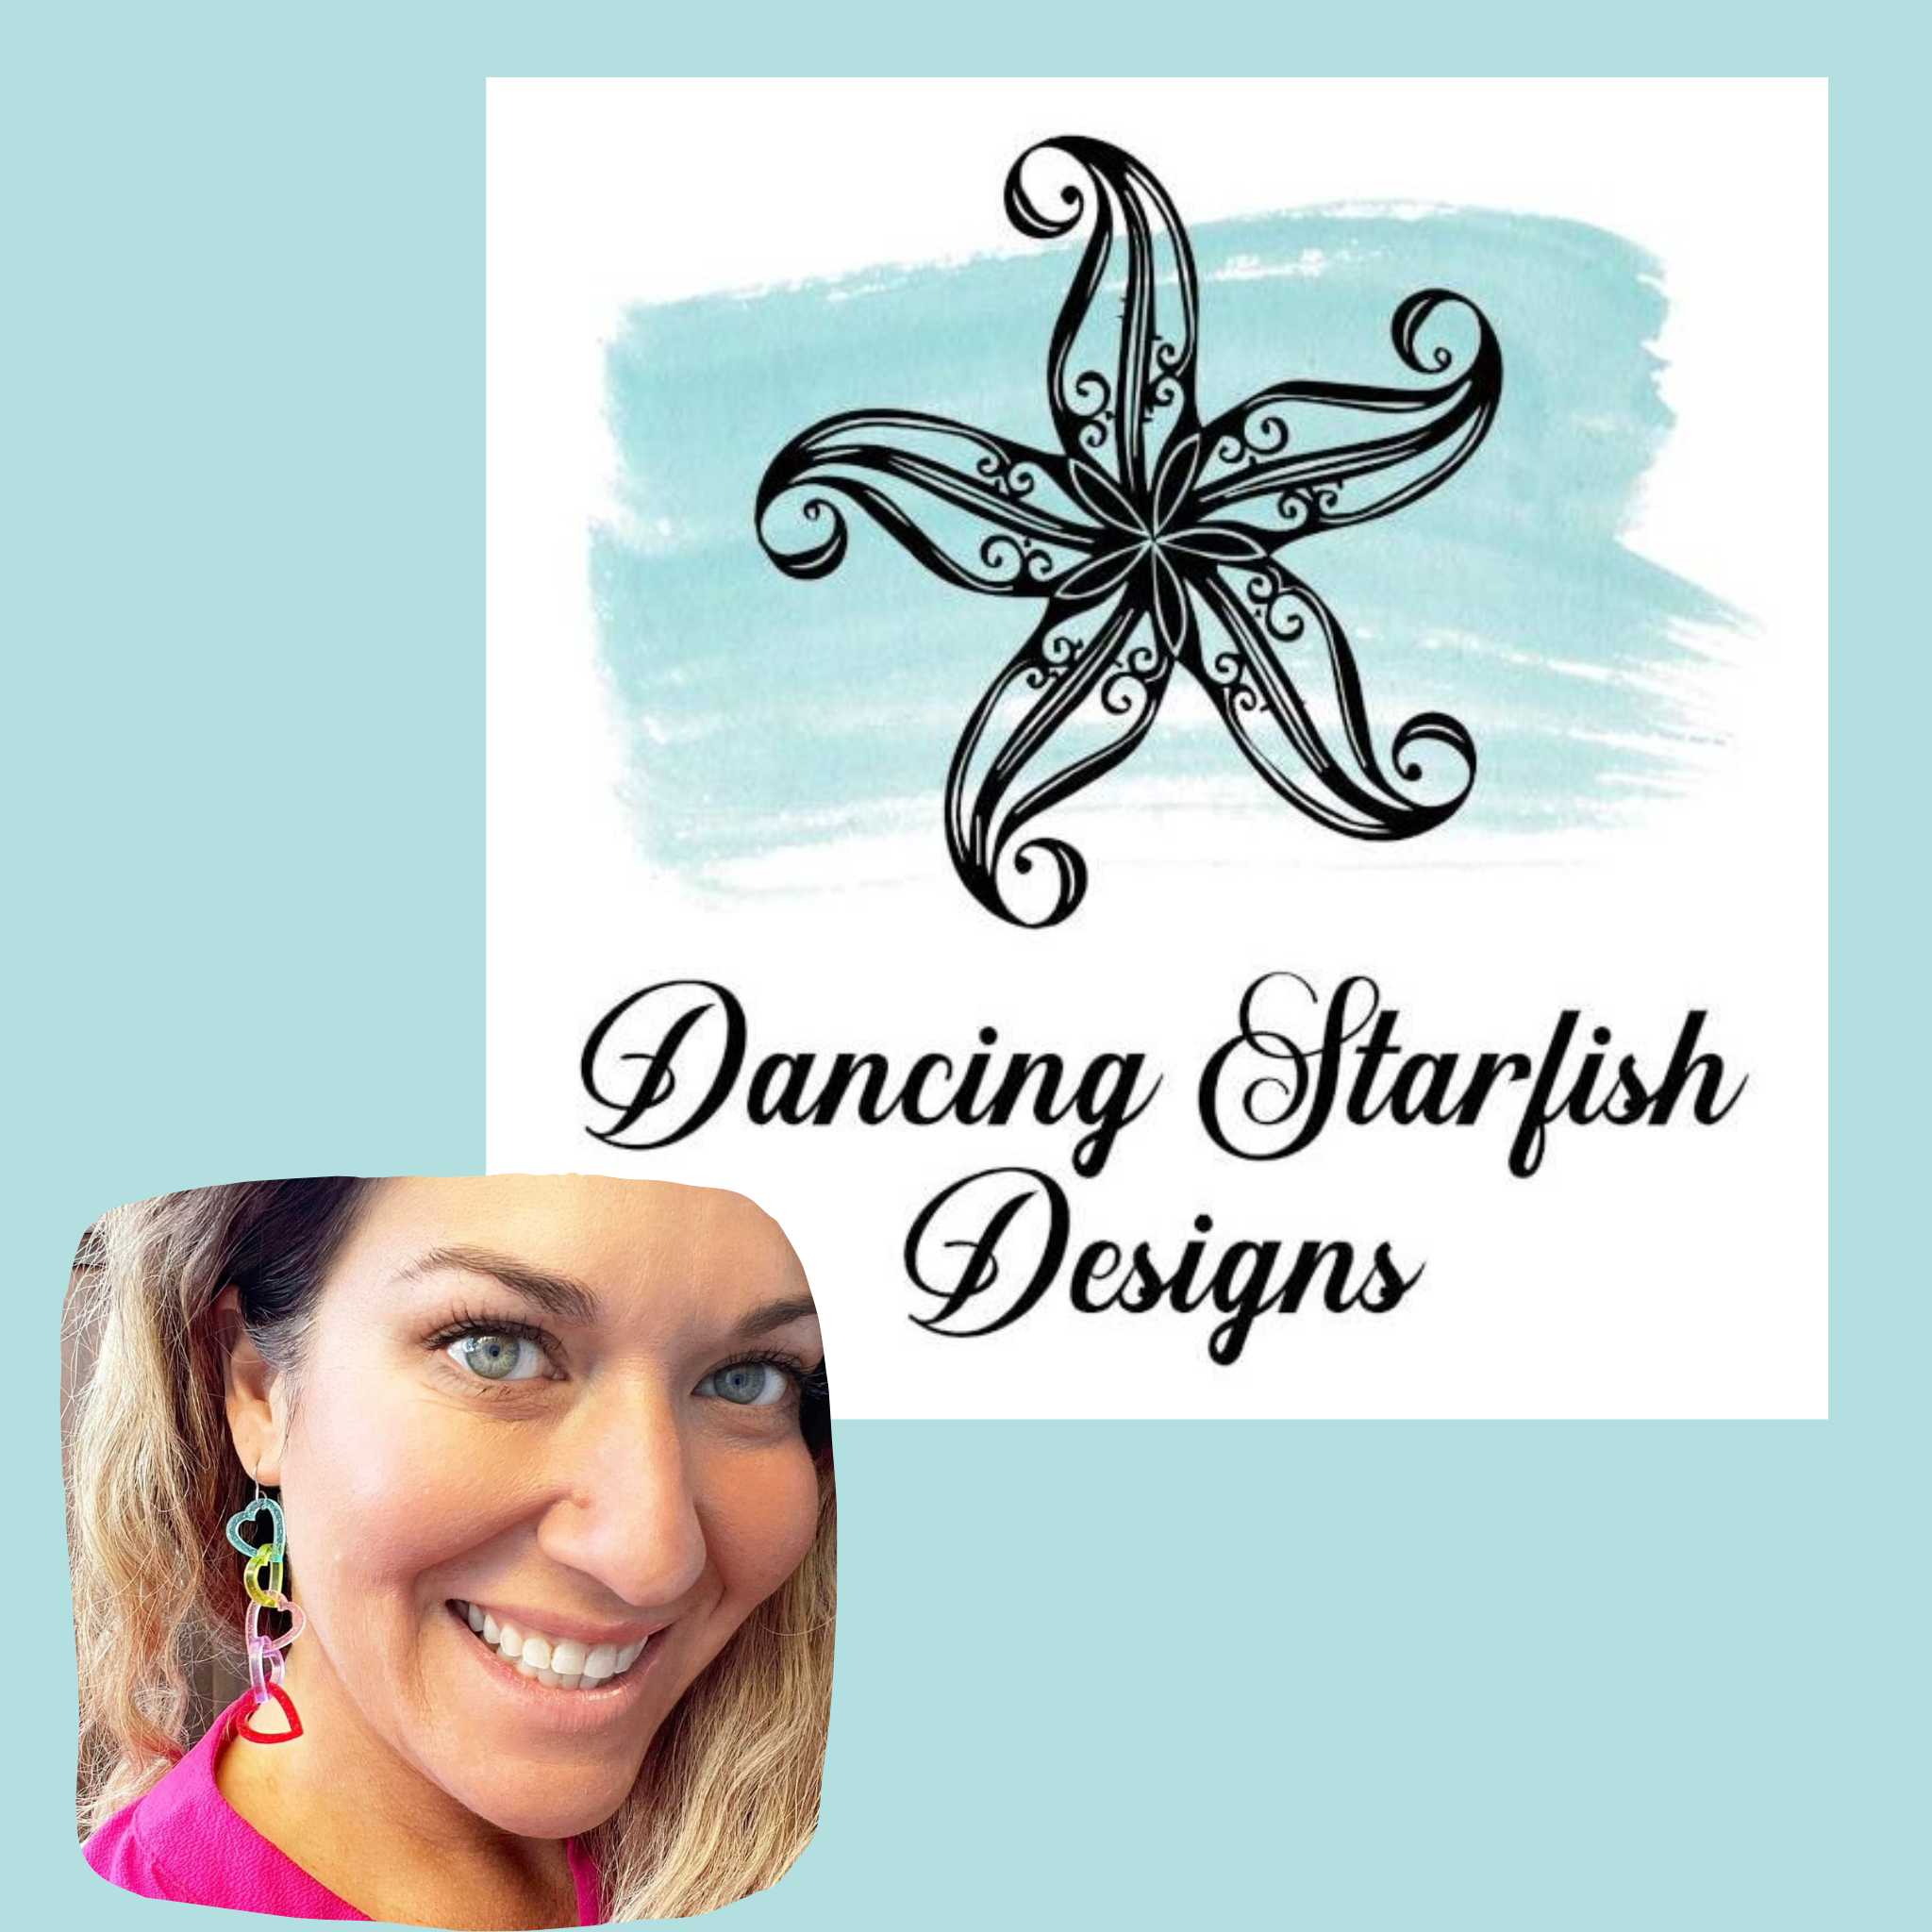 Stephanie Gross Easterling, the founder and creator of Dancing Starfish Designs, a jewelry making company